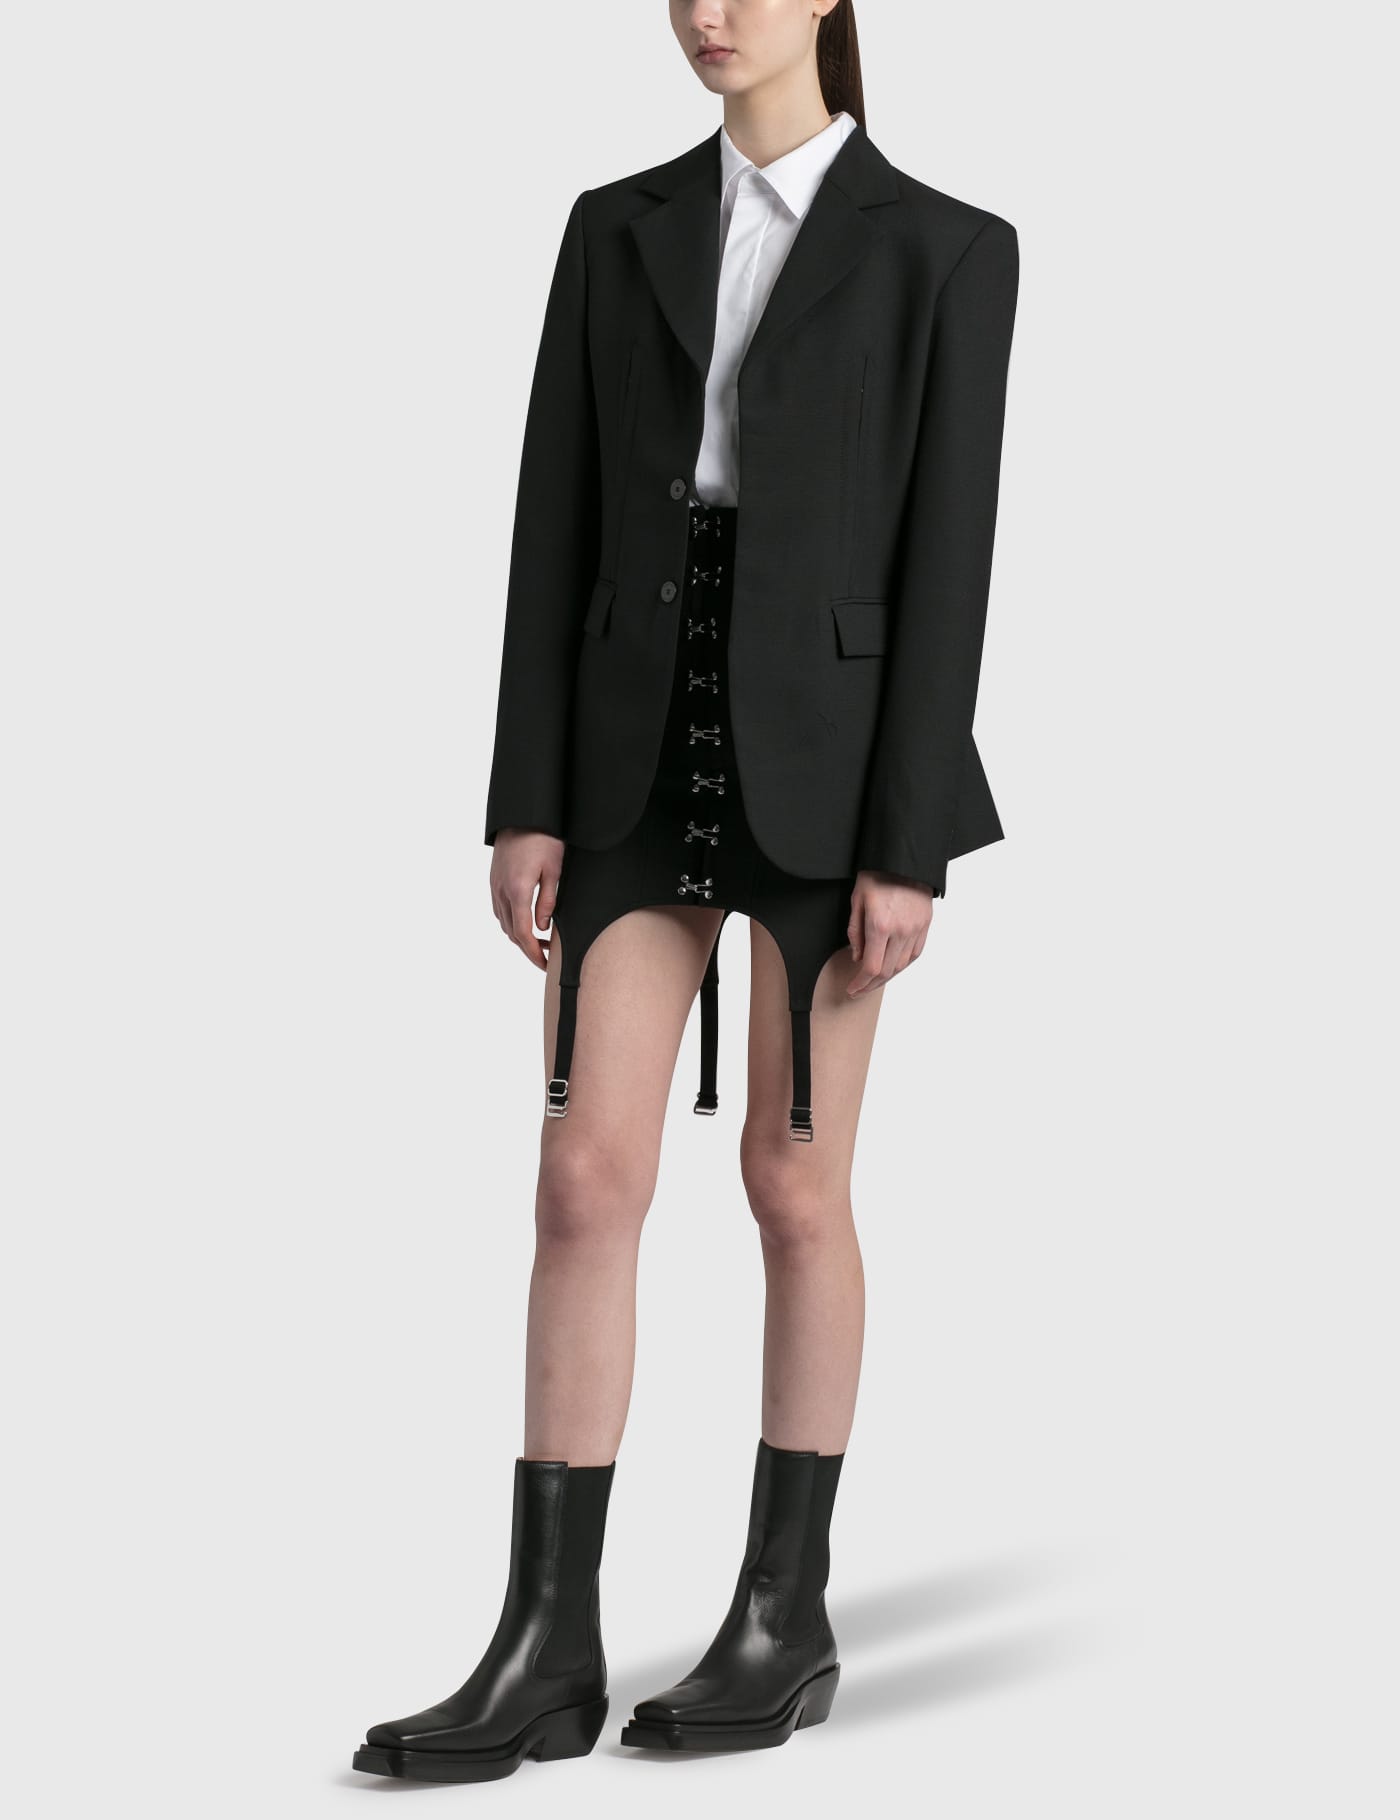 Dion Lee - Corset Garter Skirt | HBX - Globally Curated Fashion